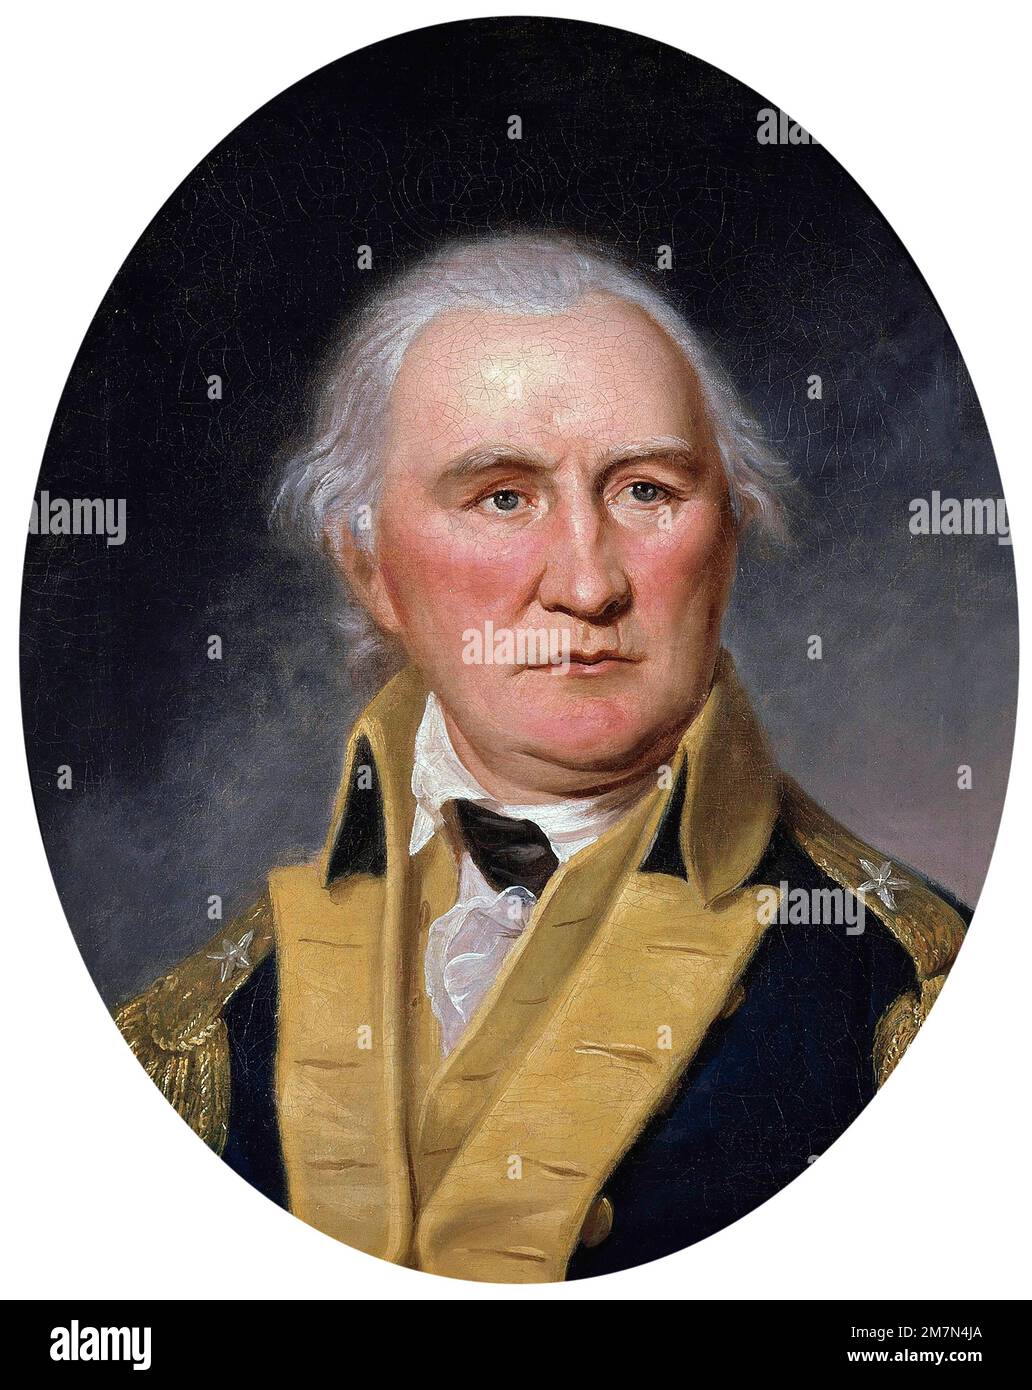 Daniel Morgan. Portrait of the American soldier and politician from Virginia, Daniel Morgan (c. 1735/1736-1802) by Charles Willson Peale, oil on canvas, c. 1794 Stock Photo